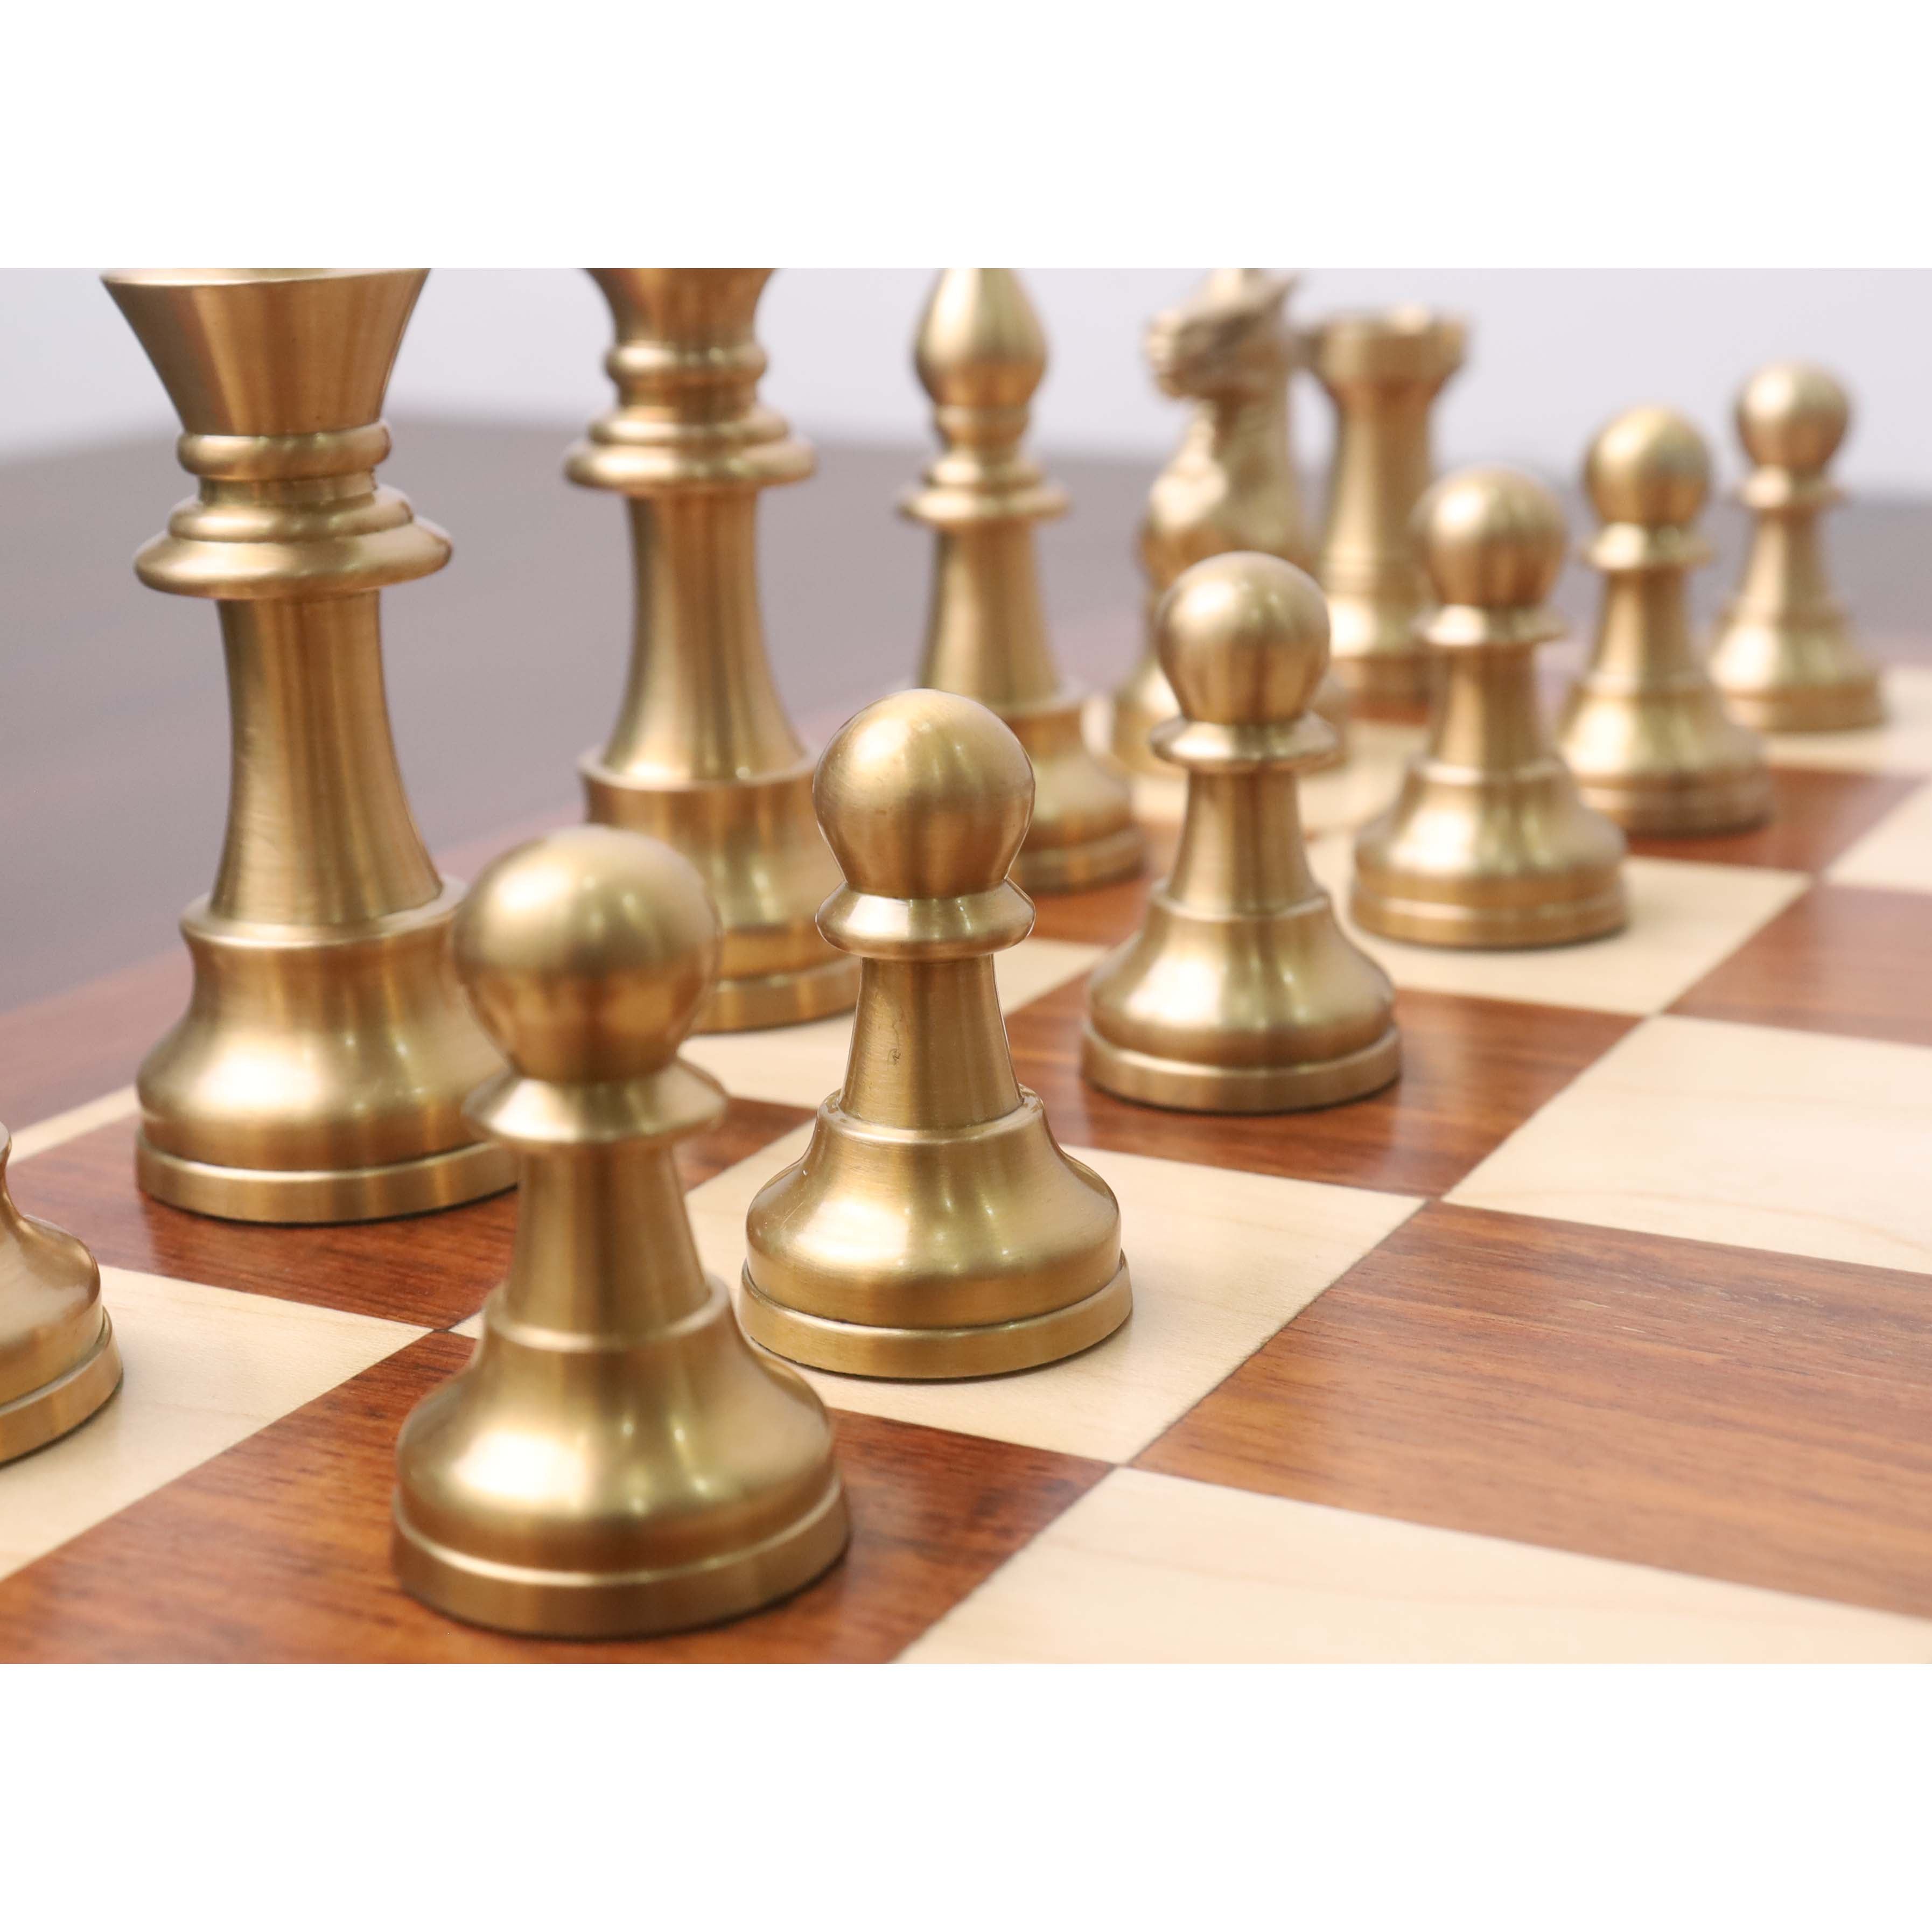 3.2" Pro Staunton Brass Metal Luxury Chess Set - Pieces Only- Antiqued Copper